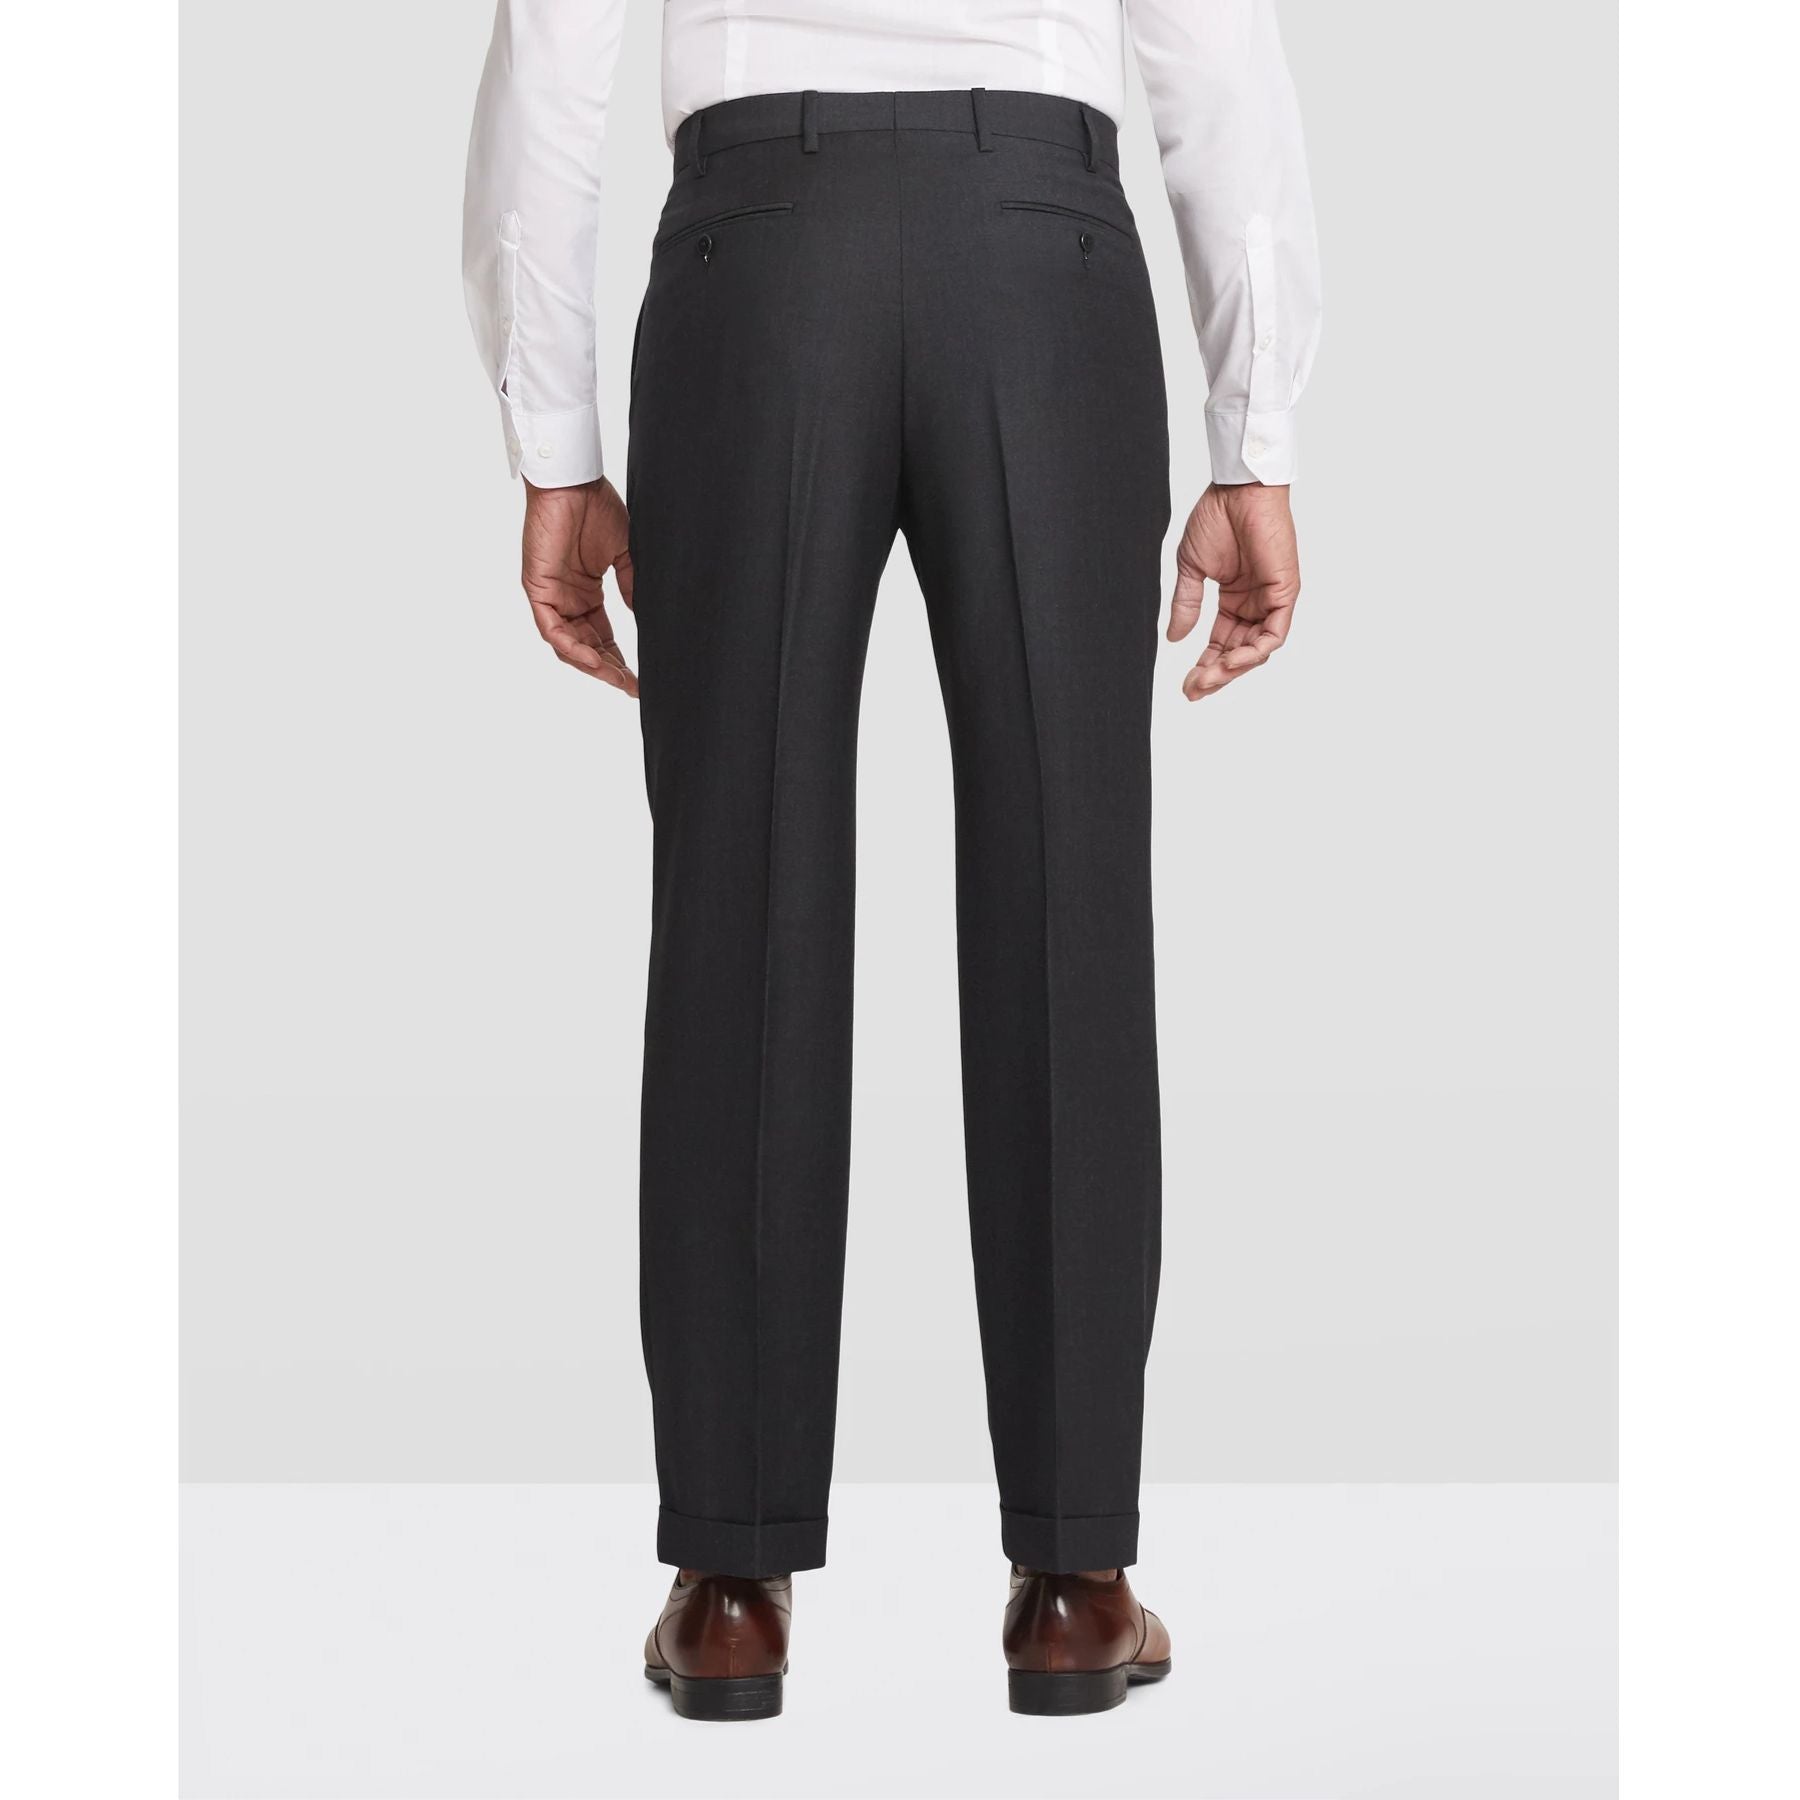 Todd Flat Front Super 120s Wool Serge Trouser in Charcoal (Full Fit) by Zanella